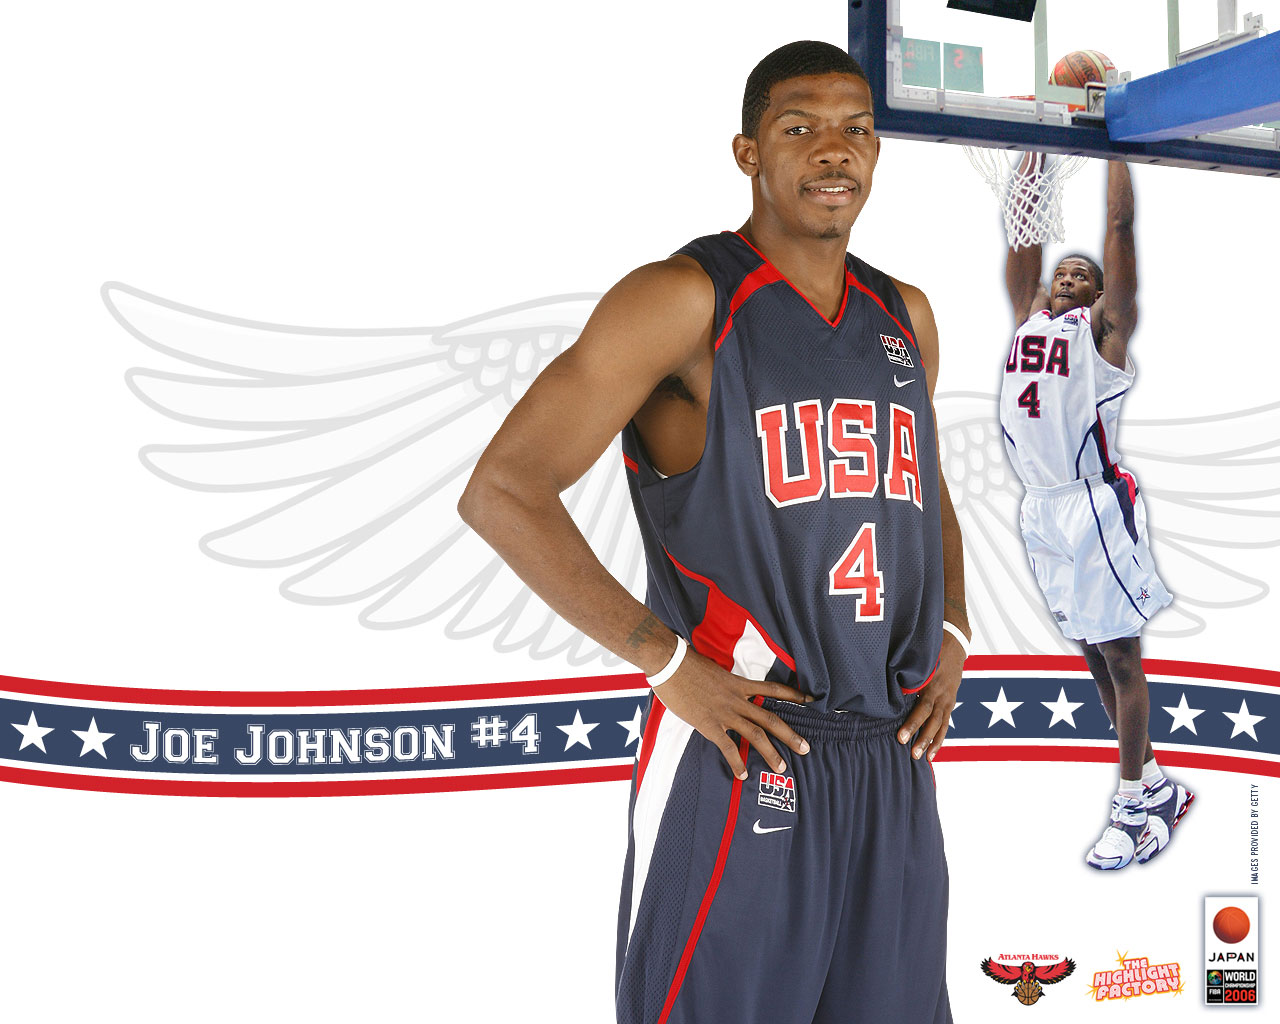 In next wallpaper Joe Johnson is going for two handed slam dunk in USA 